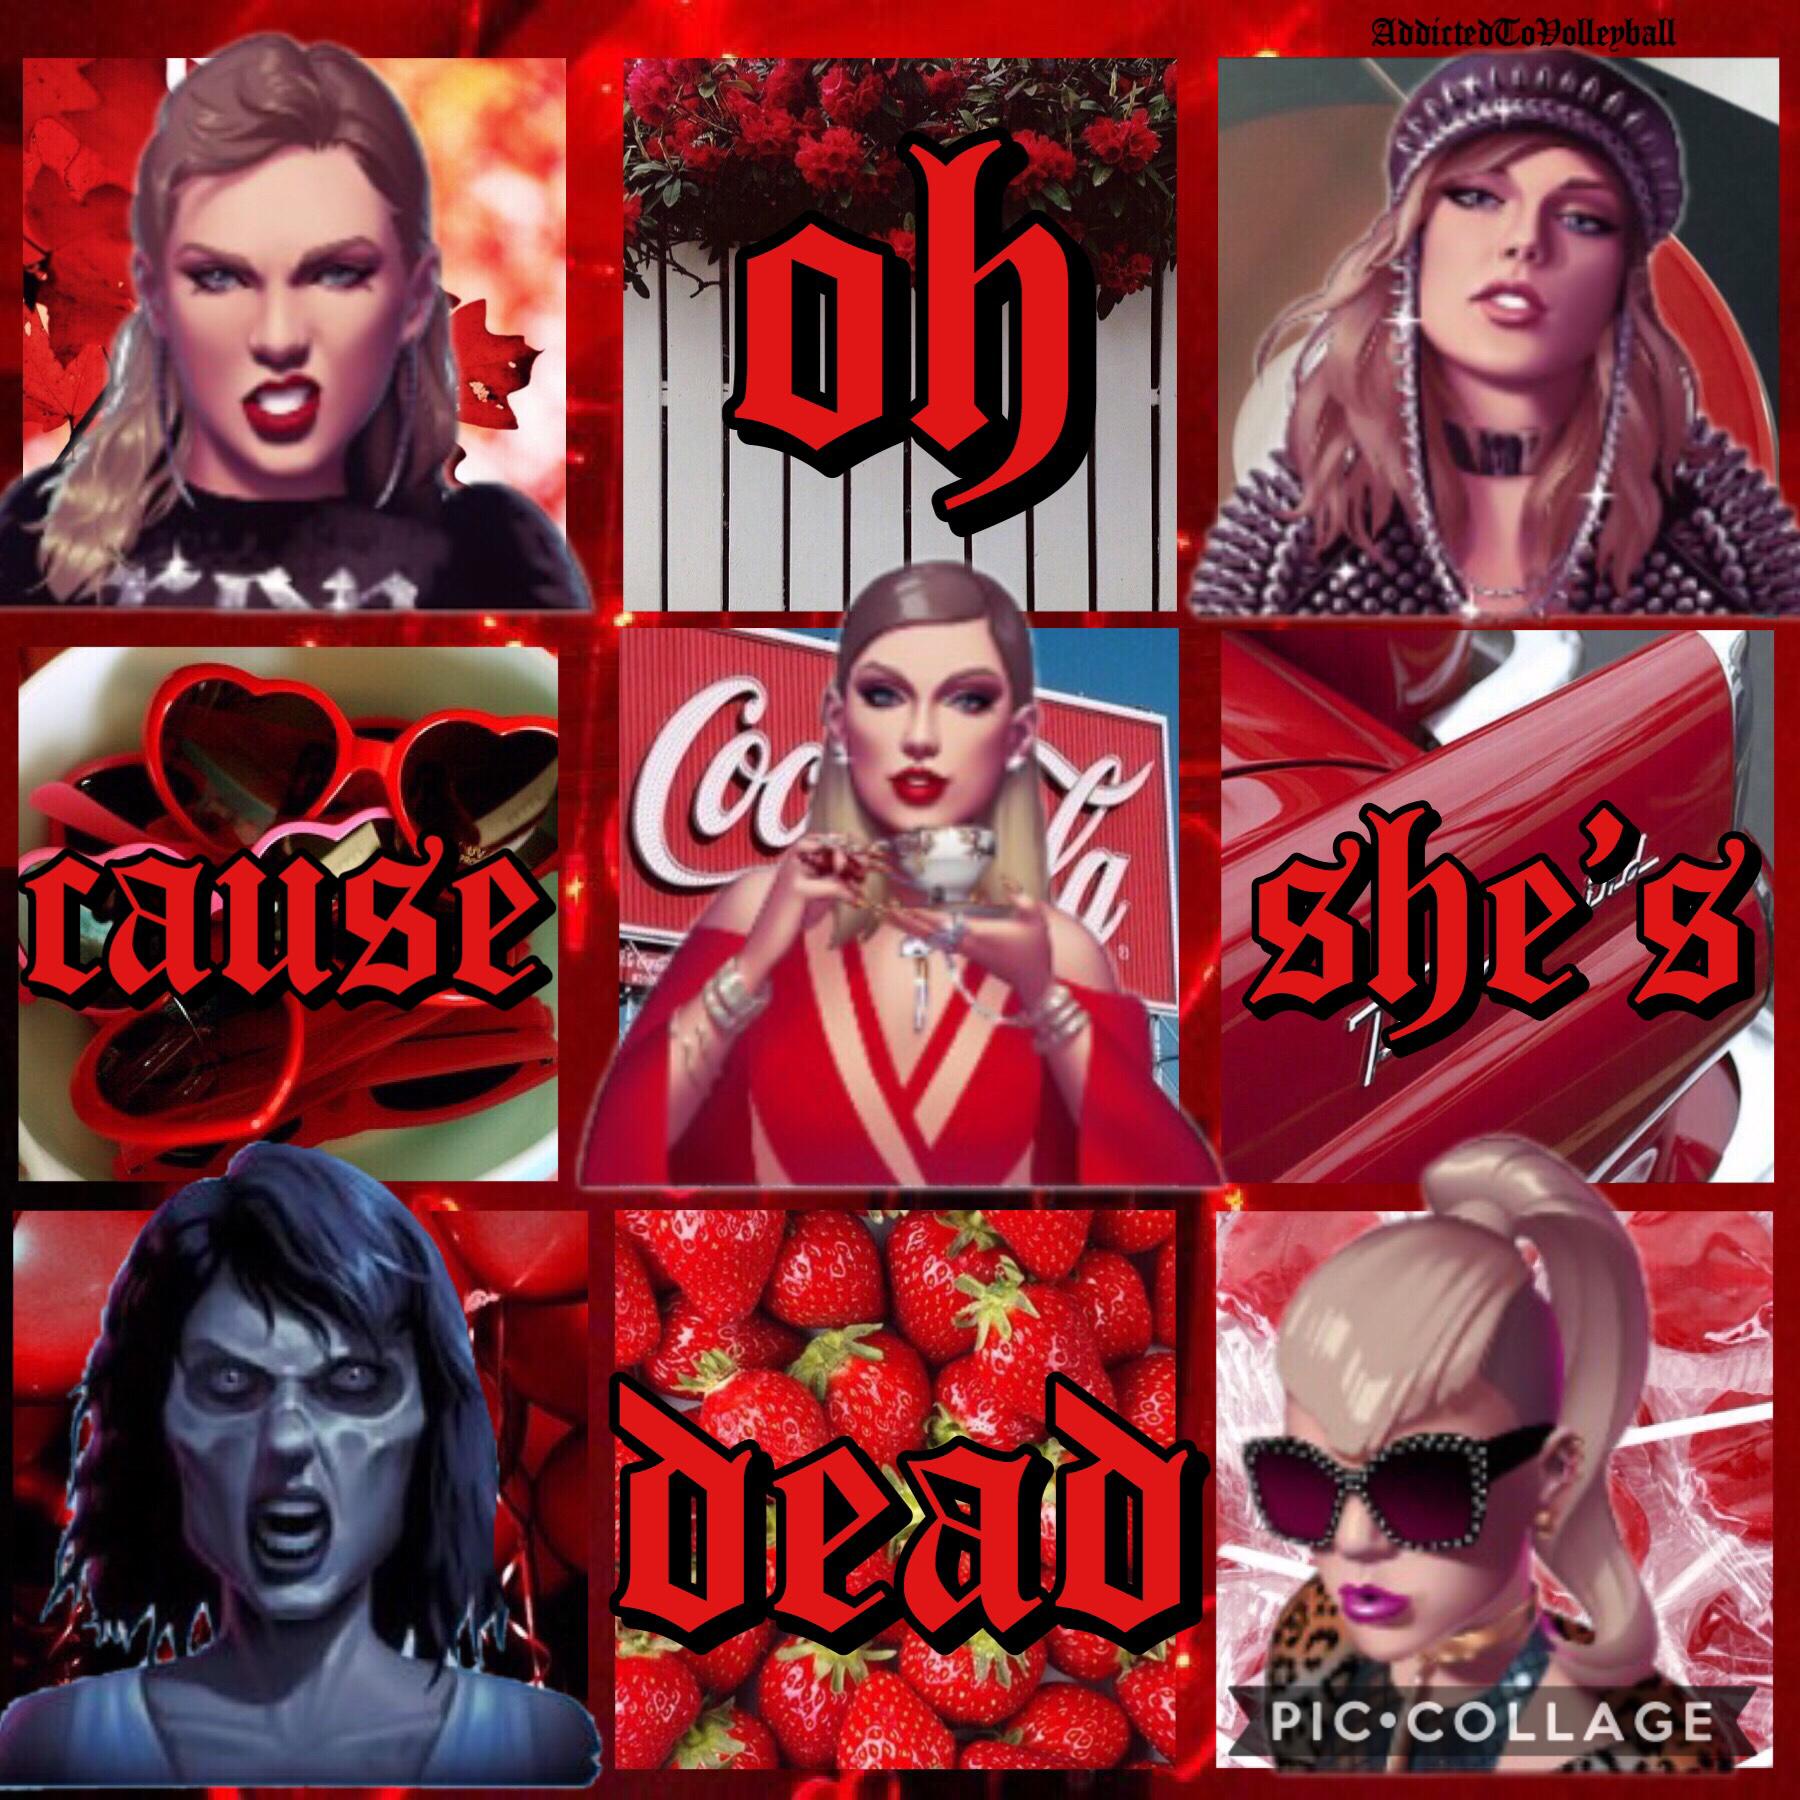 1-14-19 - lwymmd - click!
ooh lwymmd..
vices & virtues is so freaking good 👏🏼
rip tsl 💀
rate /10 ♥️
QOTD: so it goes... or i almost do?
AOTD: i almost do!! ♥️